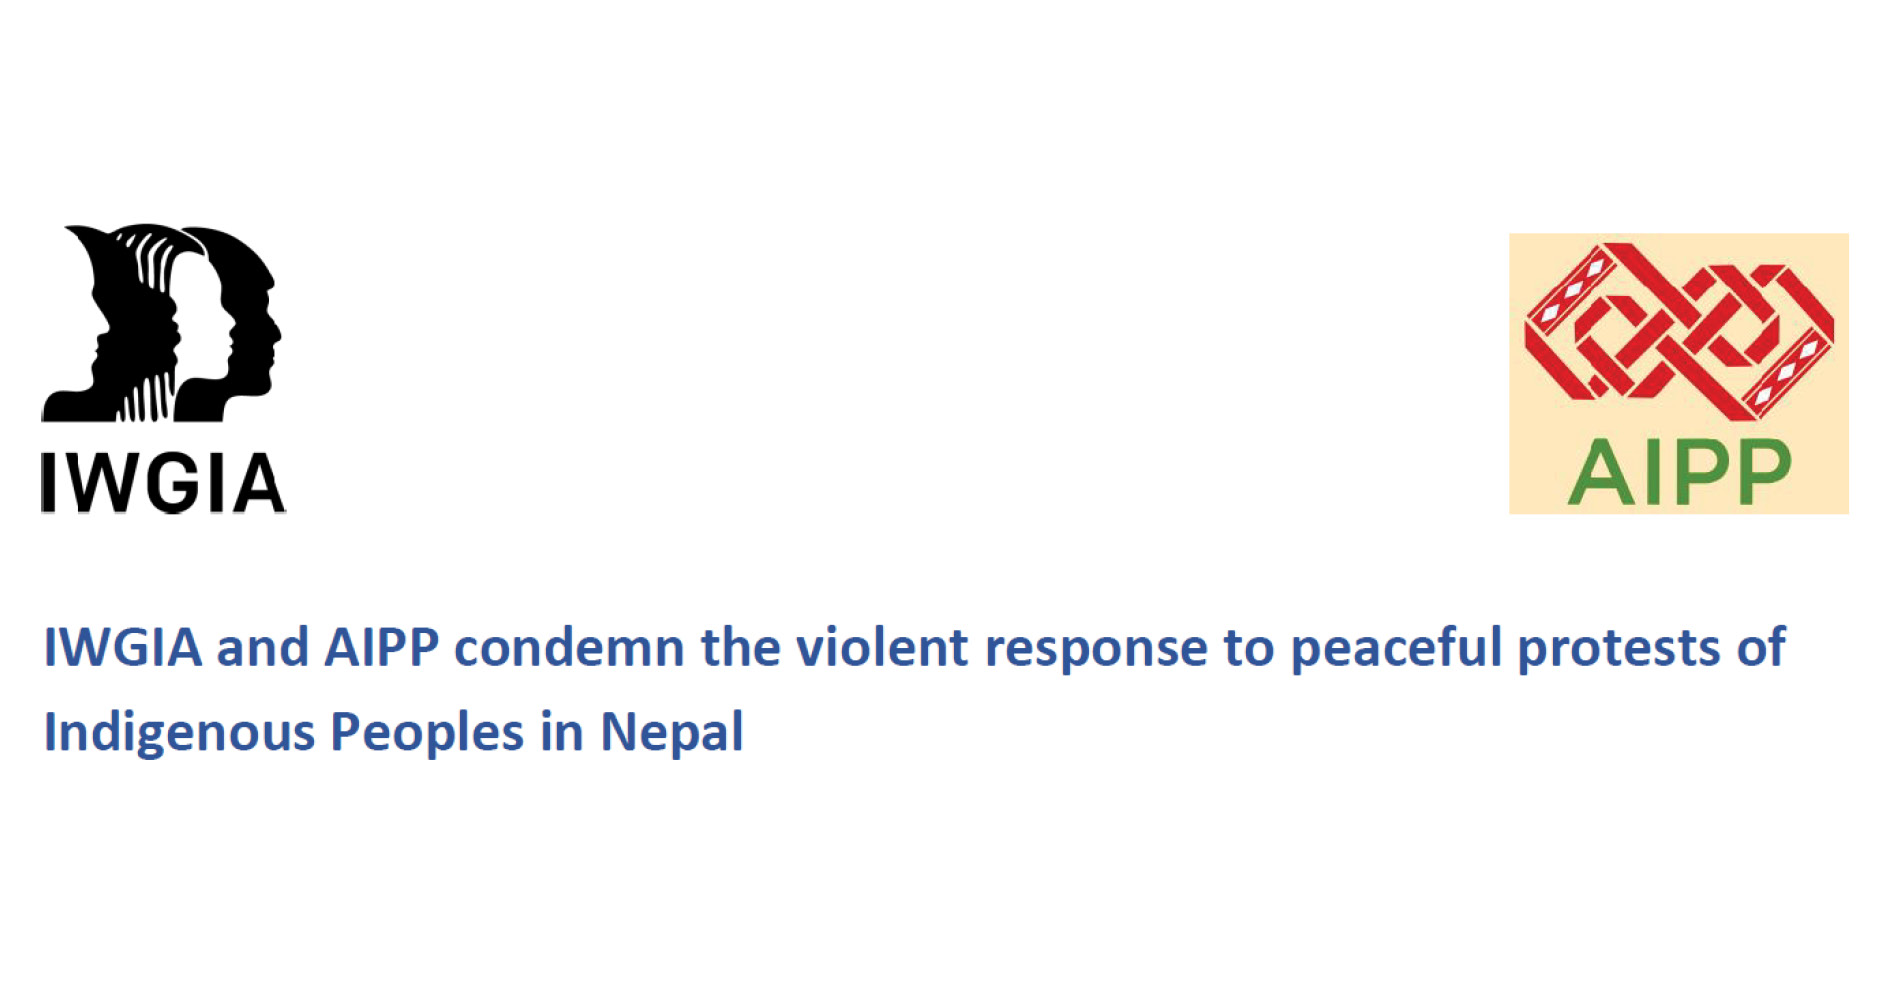 IWGIA and AIPP condemn the violent response to peaceful protests of Indigenous Peoples in Nepal